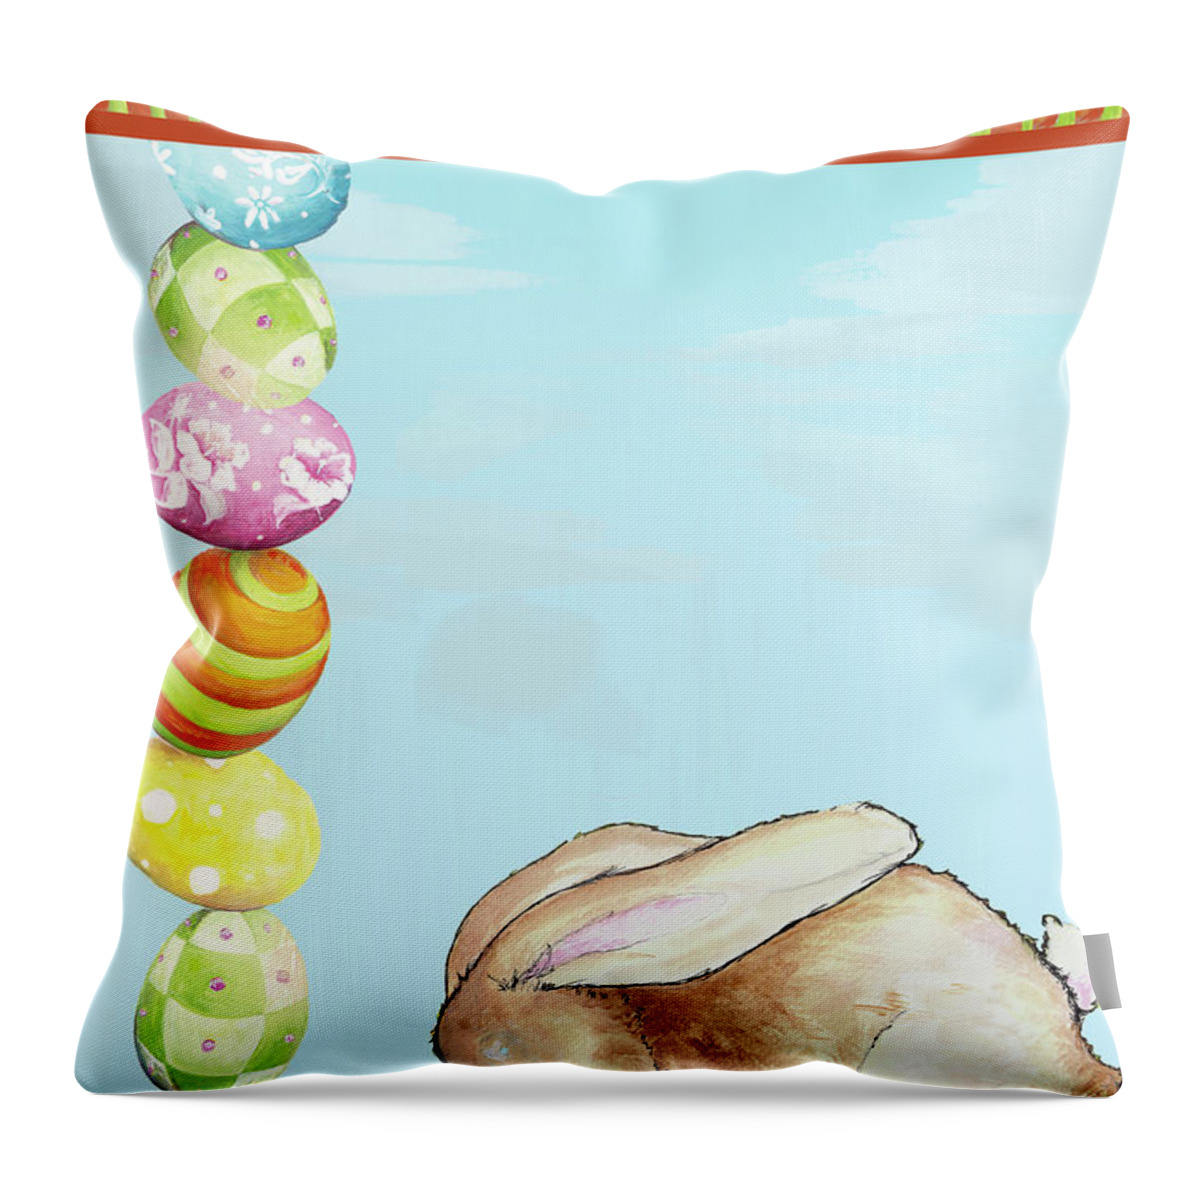 Happy Throw Pillow featuring the mixed media Happy Easter Bunny by Diannart